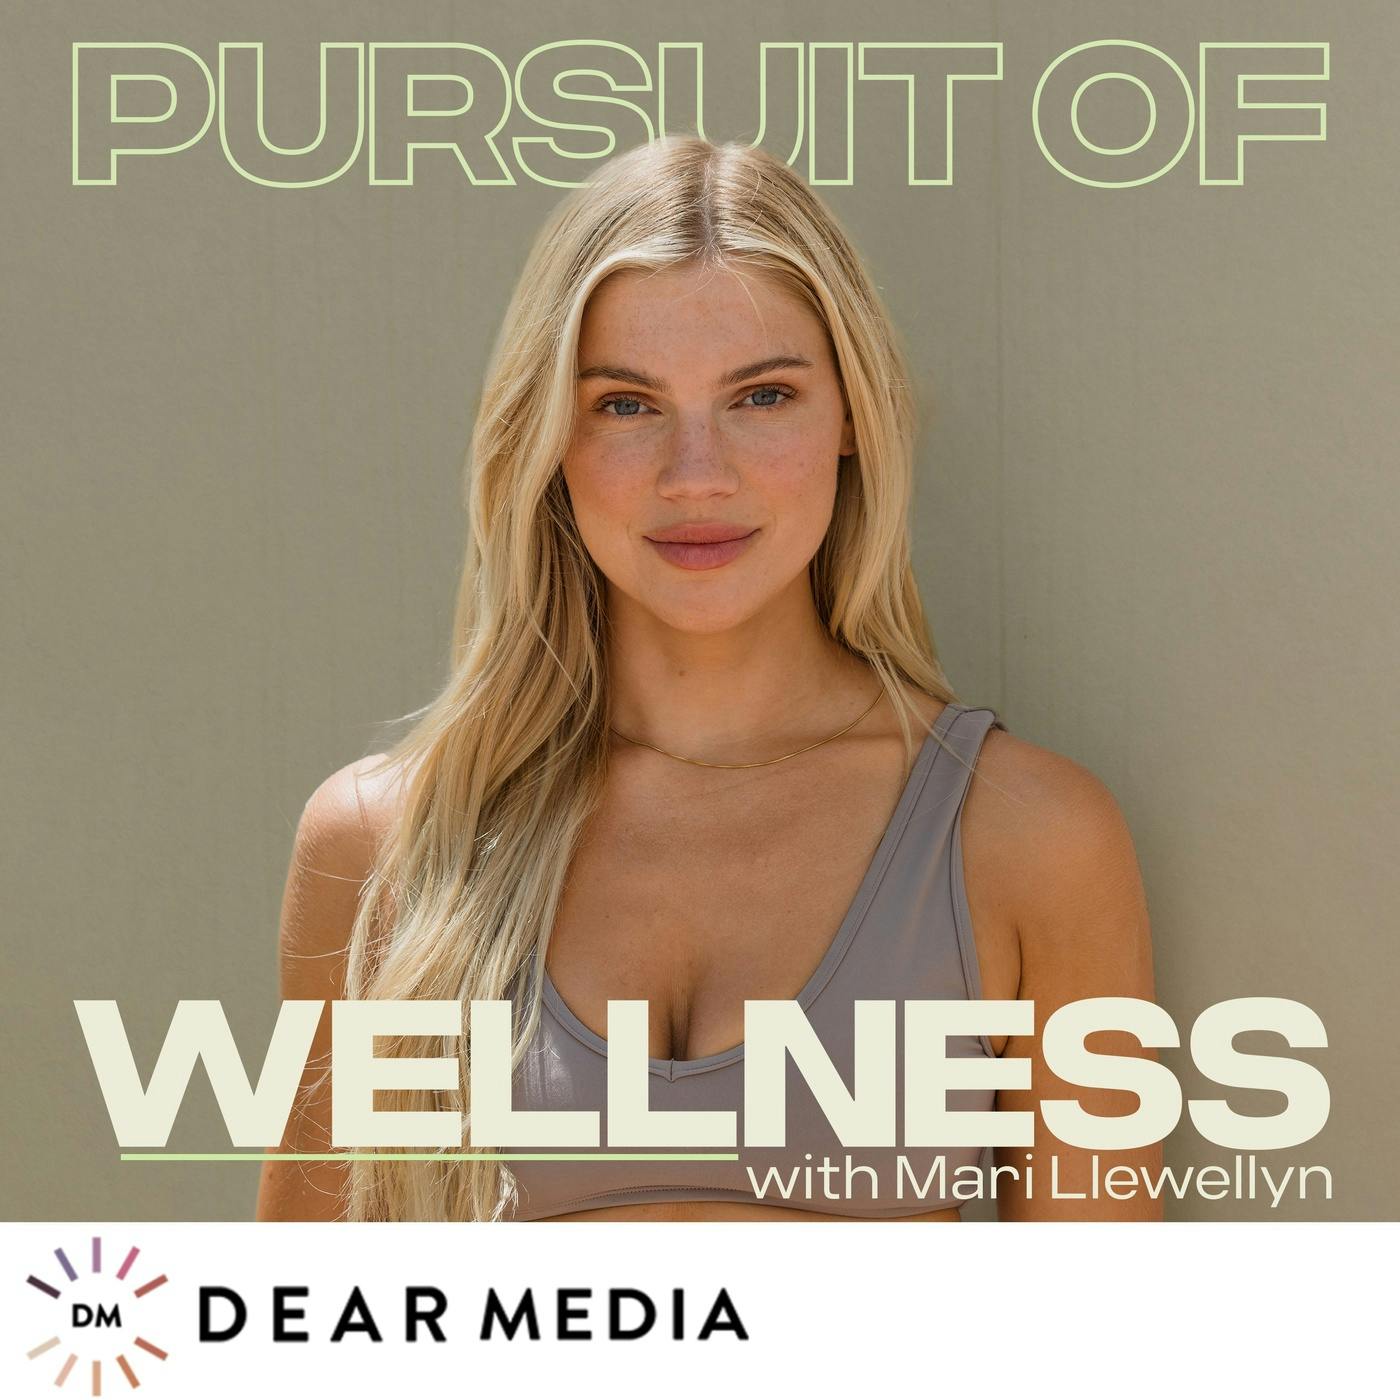 Paige Lindgren on Thyroid Health, Cycle Syncing, Menstrual Phases, Protein at Breakfast, Fight or Flight, Blue Light & Cortisol, BPA’s and Microplastics, Healthy Sleep Habits, and more.